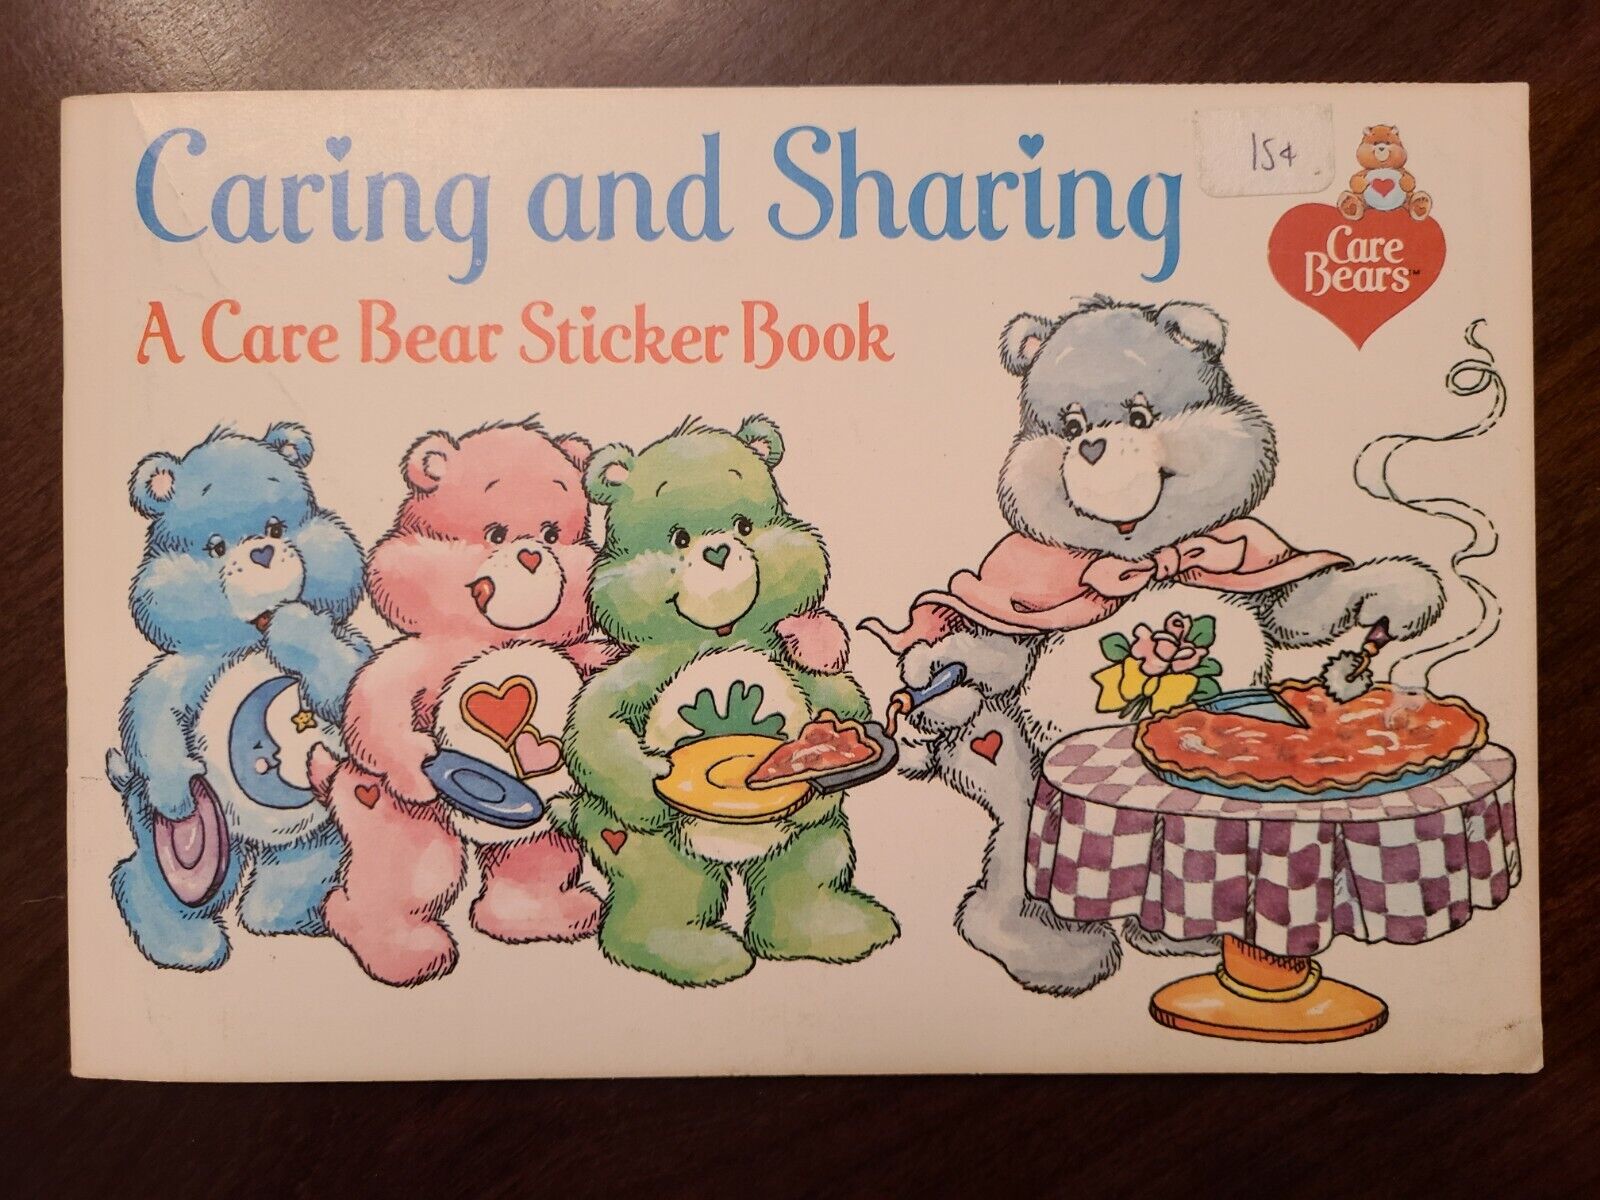 Direct sale of manufacturer 1984 Care Bears Caring and Sharing Pizza Book Hut Exclus Sticker Beauty products